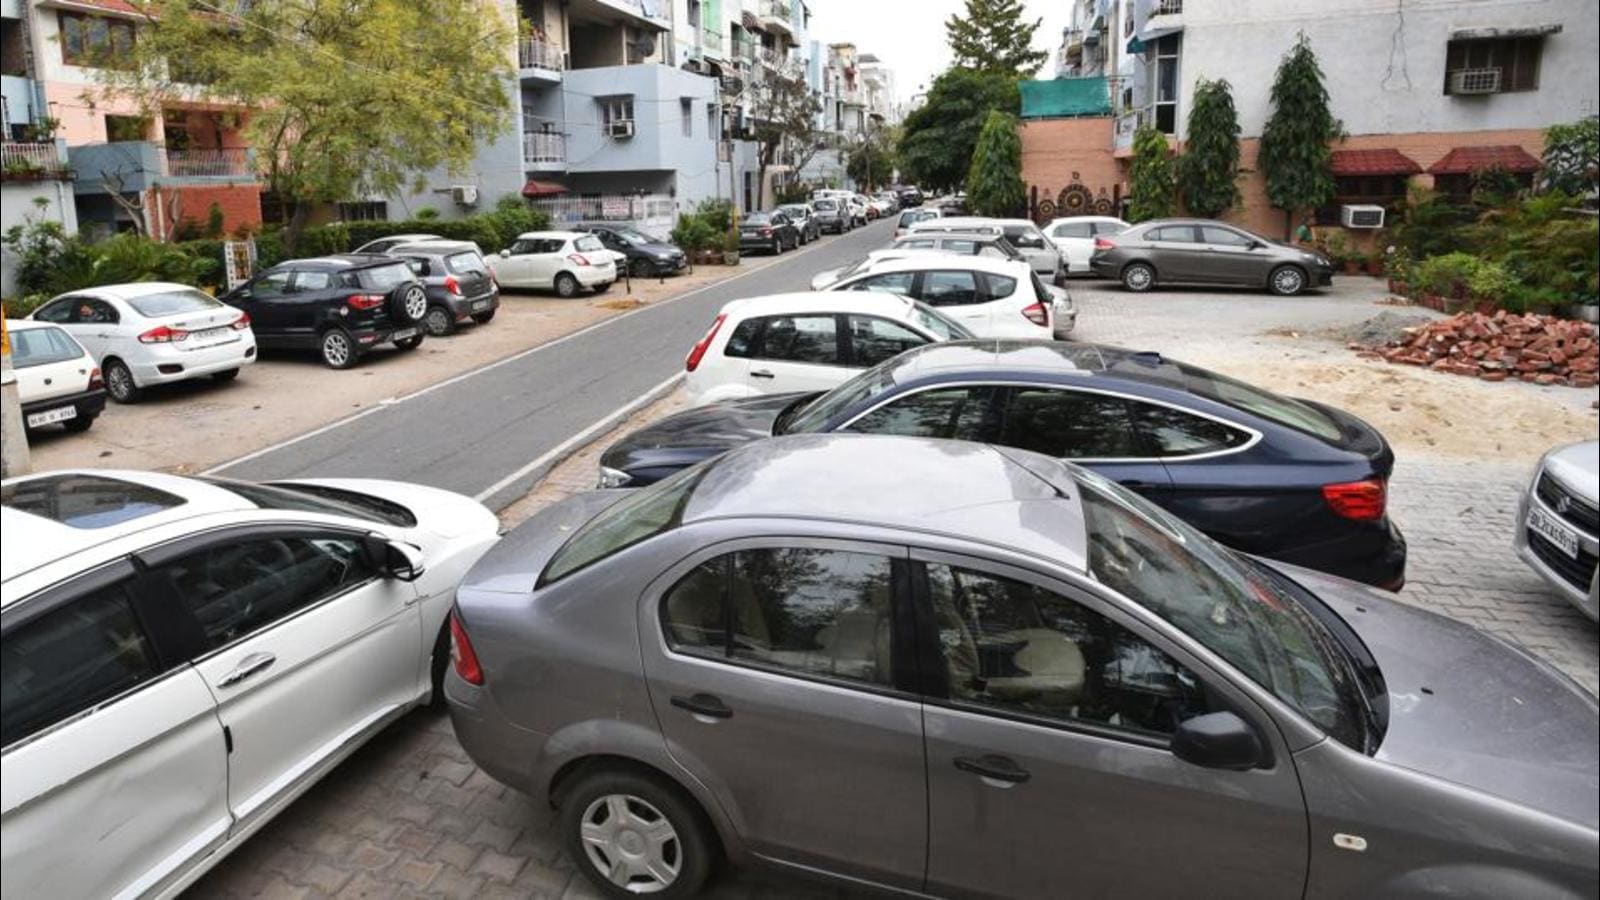 After two years, panel reviews all parking plans in Delhi